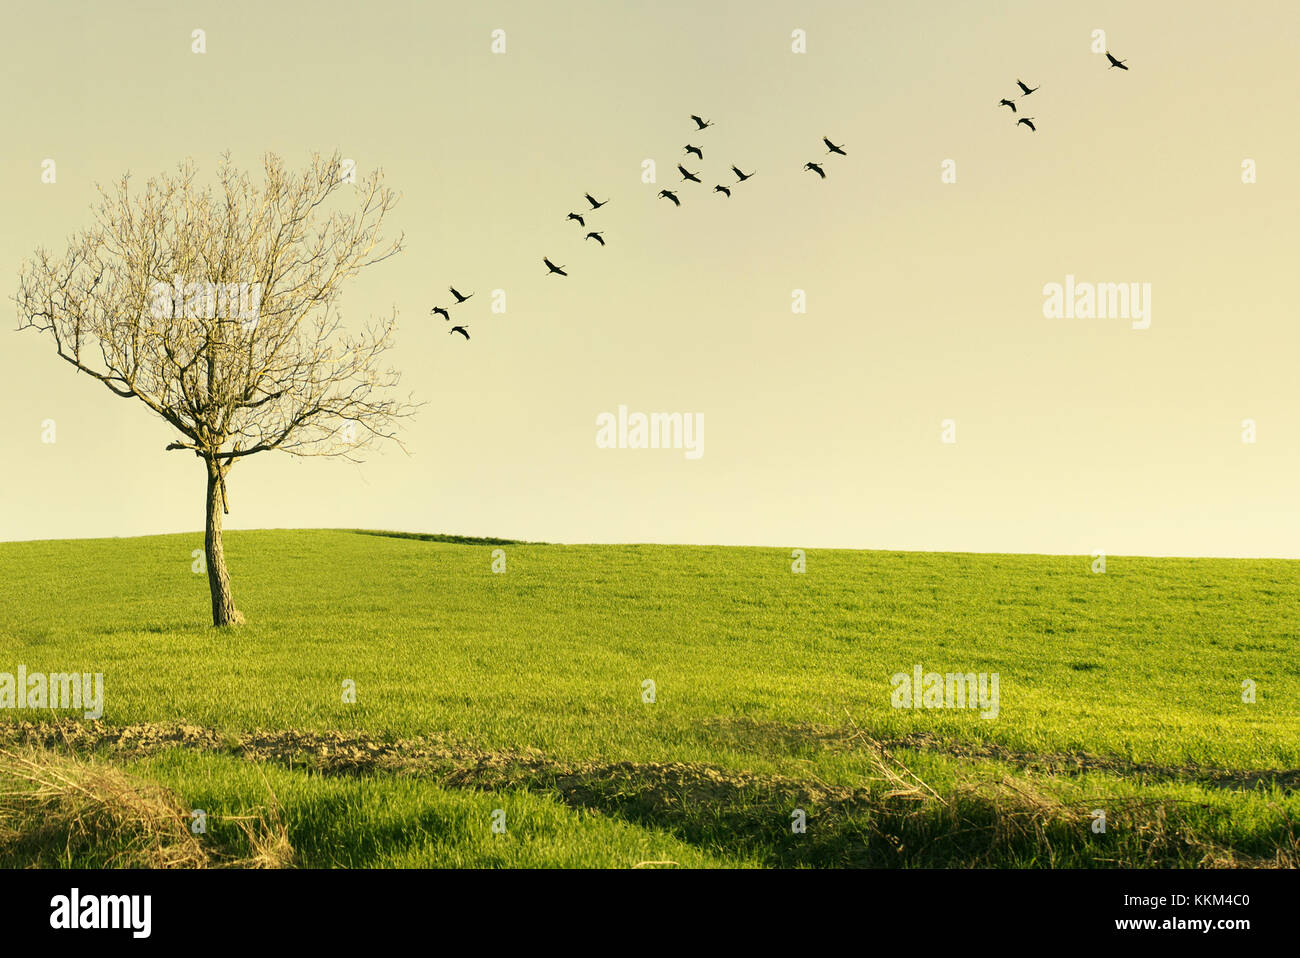 Beautiful poetic landscape with a tree isolated in a meadow and birds flying at sunset Stock Photo